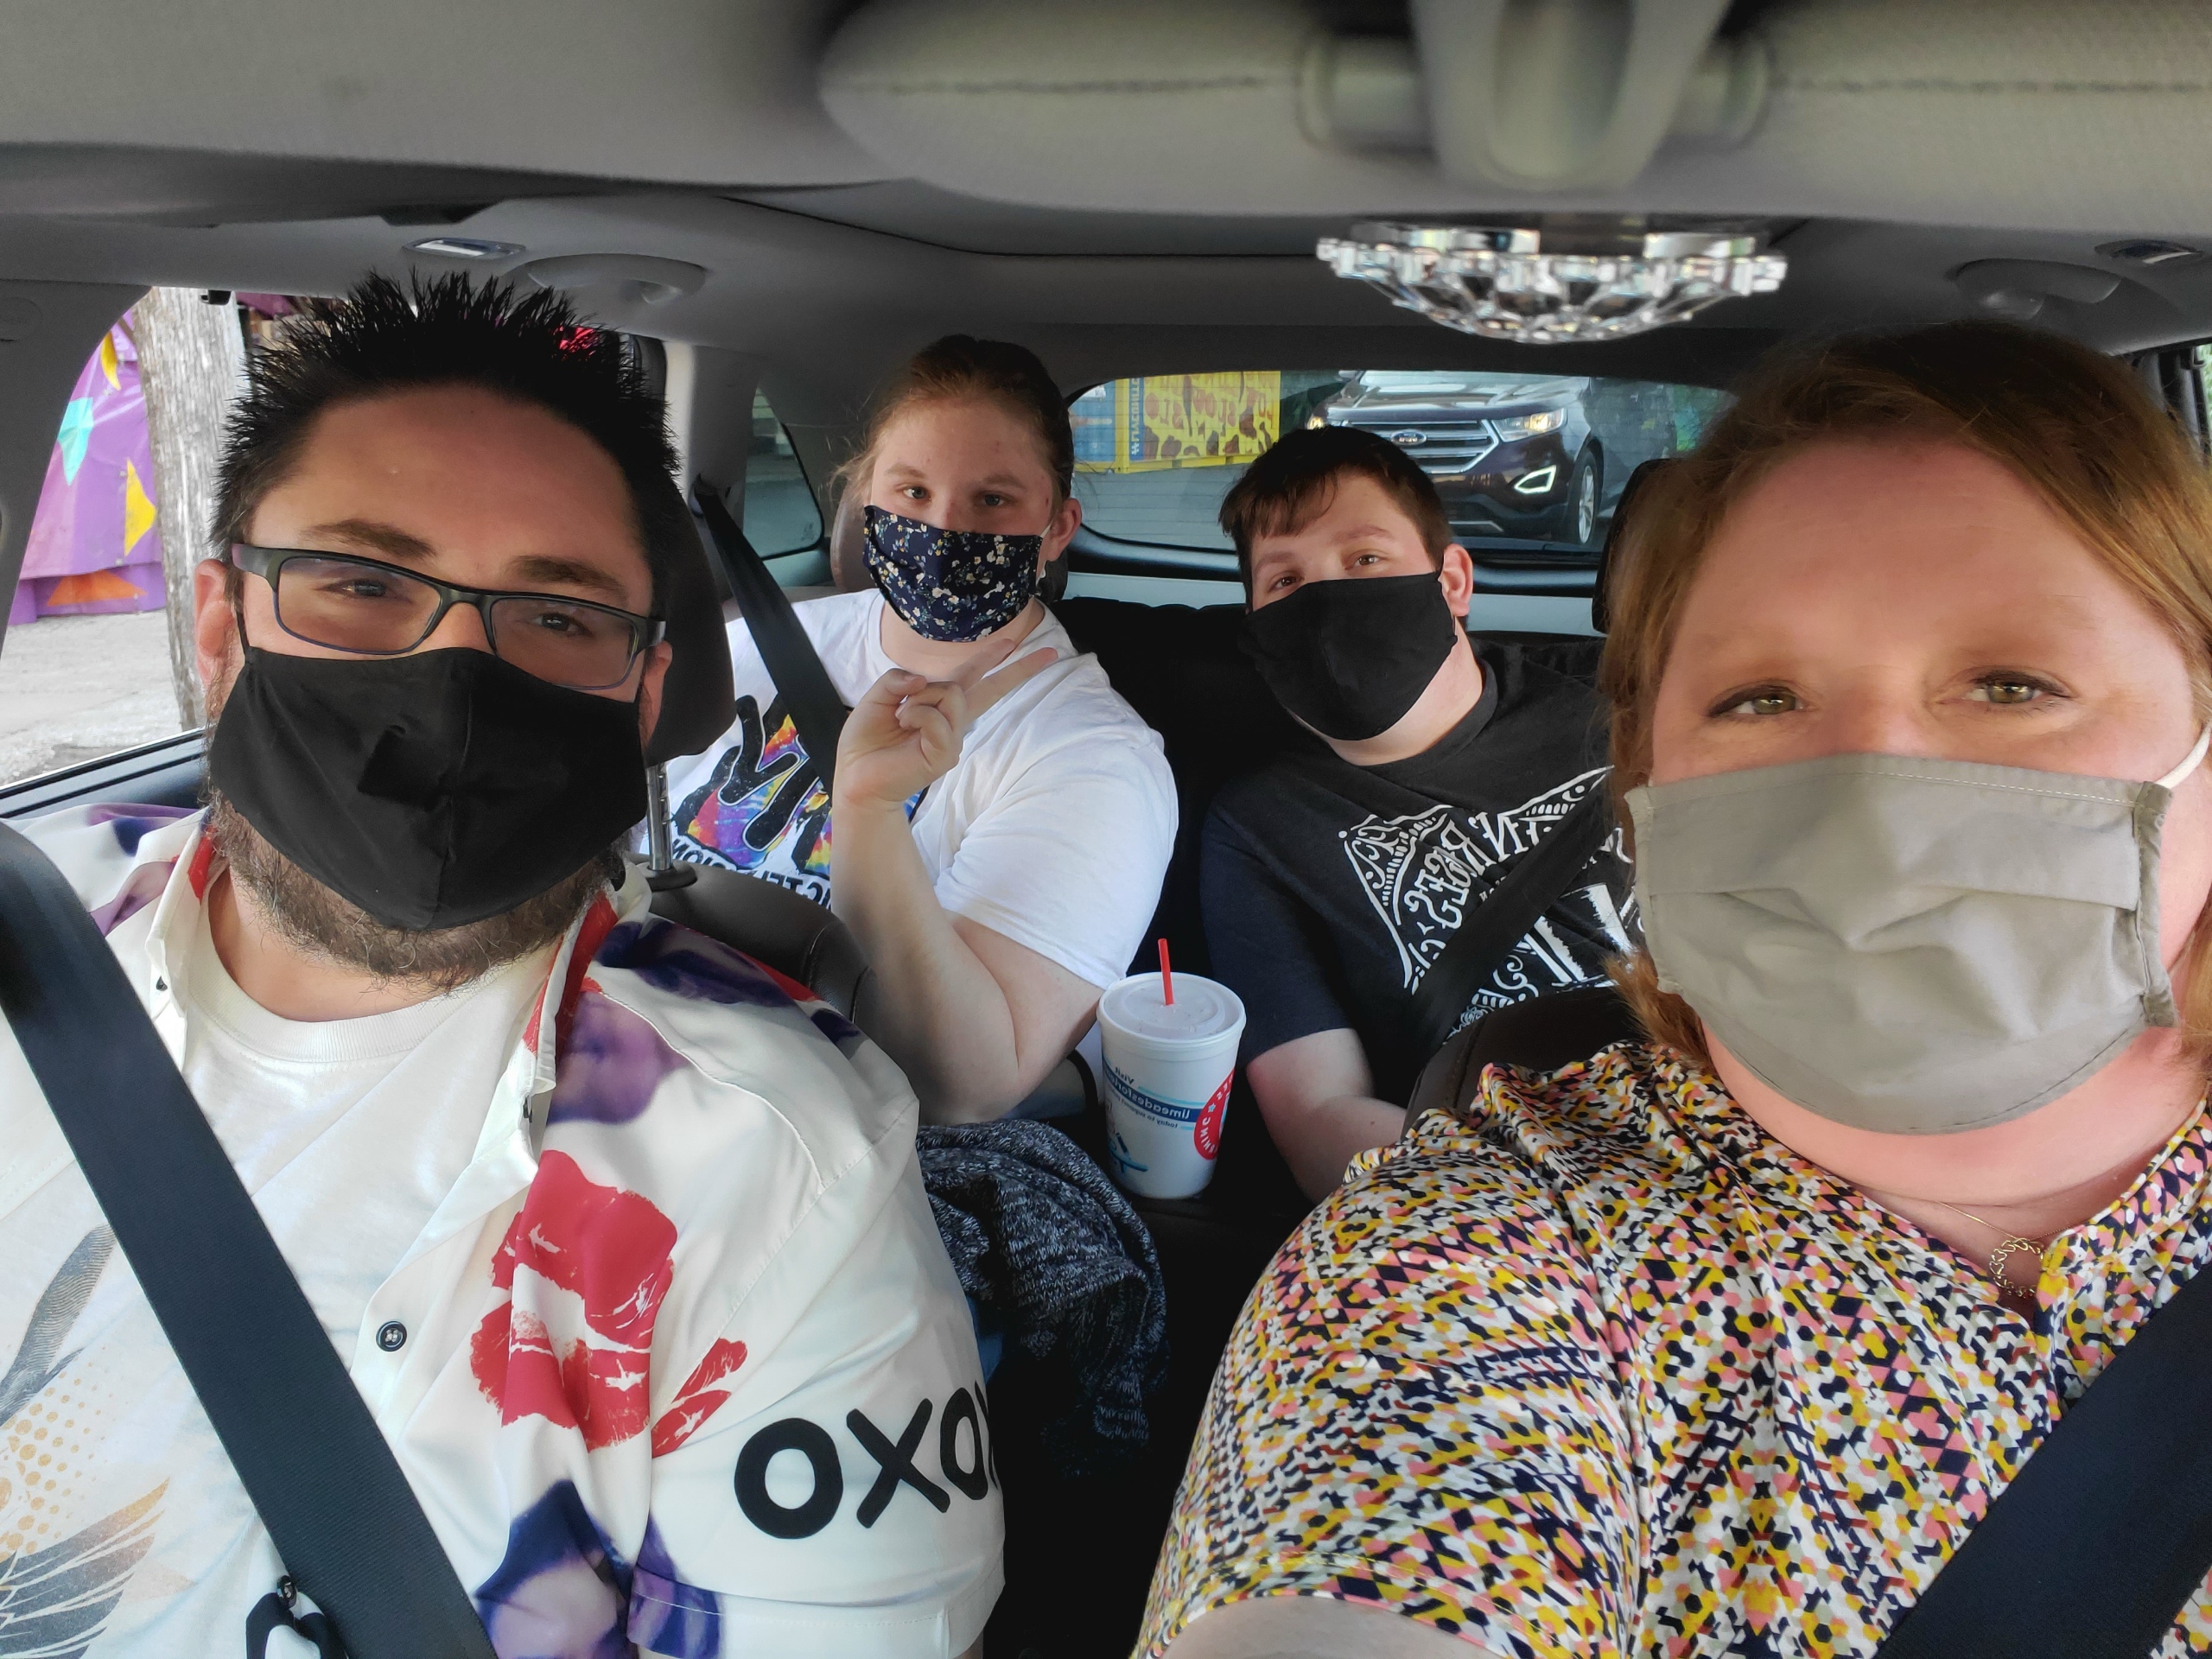 Big Dave & Family wearing masks in the car